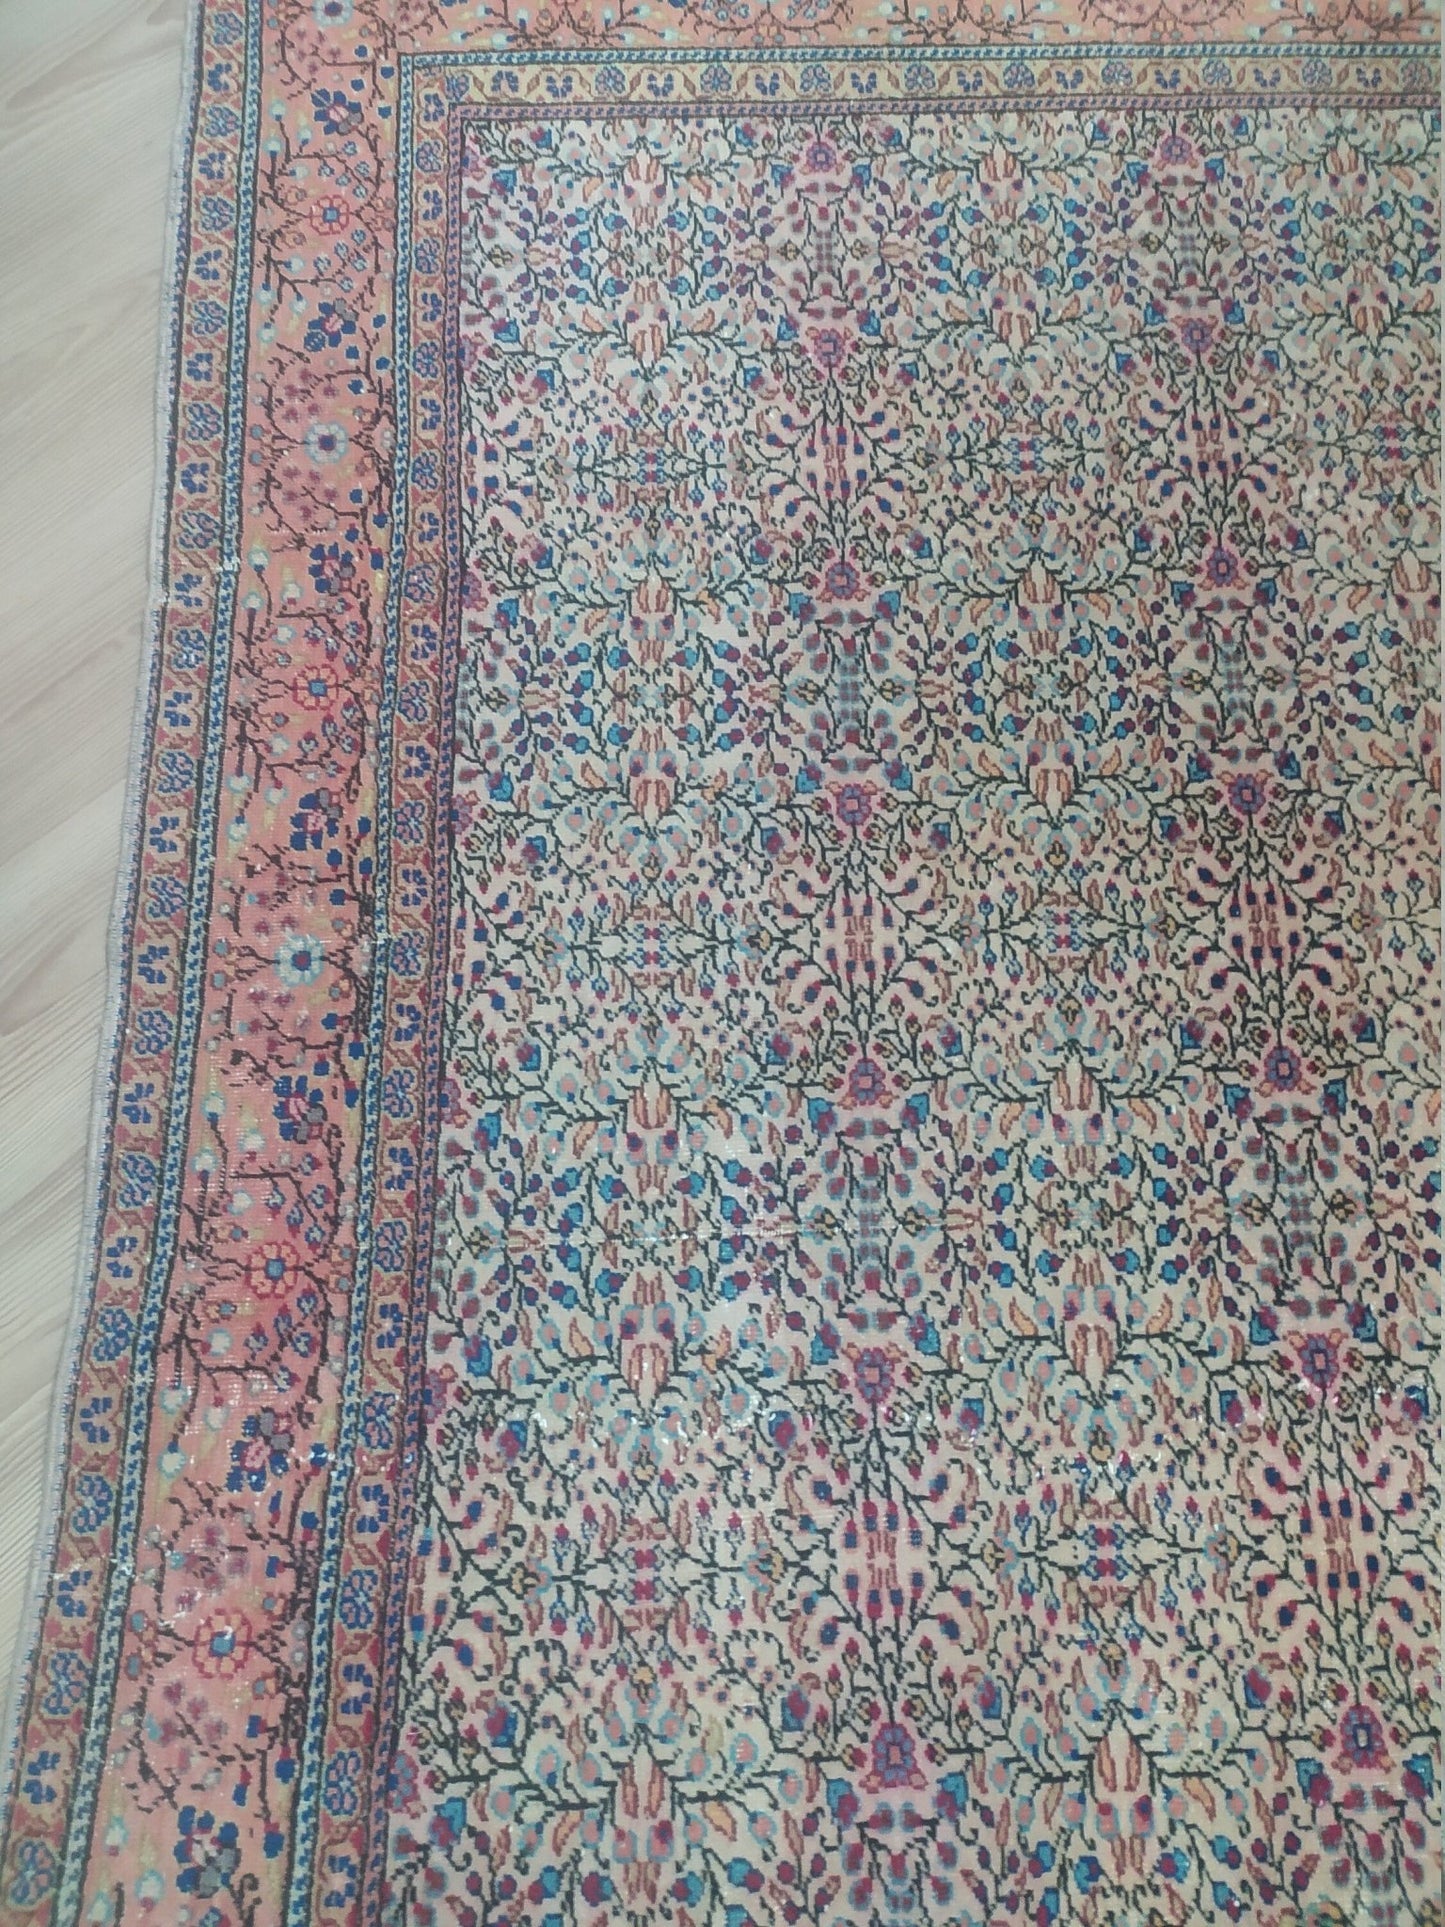 2000 Usd discount for 5 day Only 9999 Usd, 1940-1950 Hand Knotted Wool Rug, You dont buy a rug, You buy a family history  99percenthandmade   